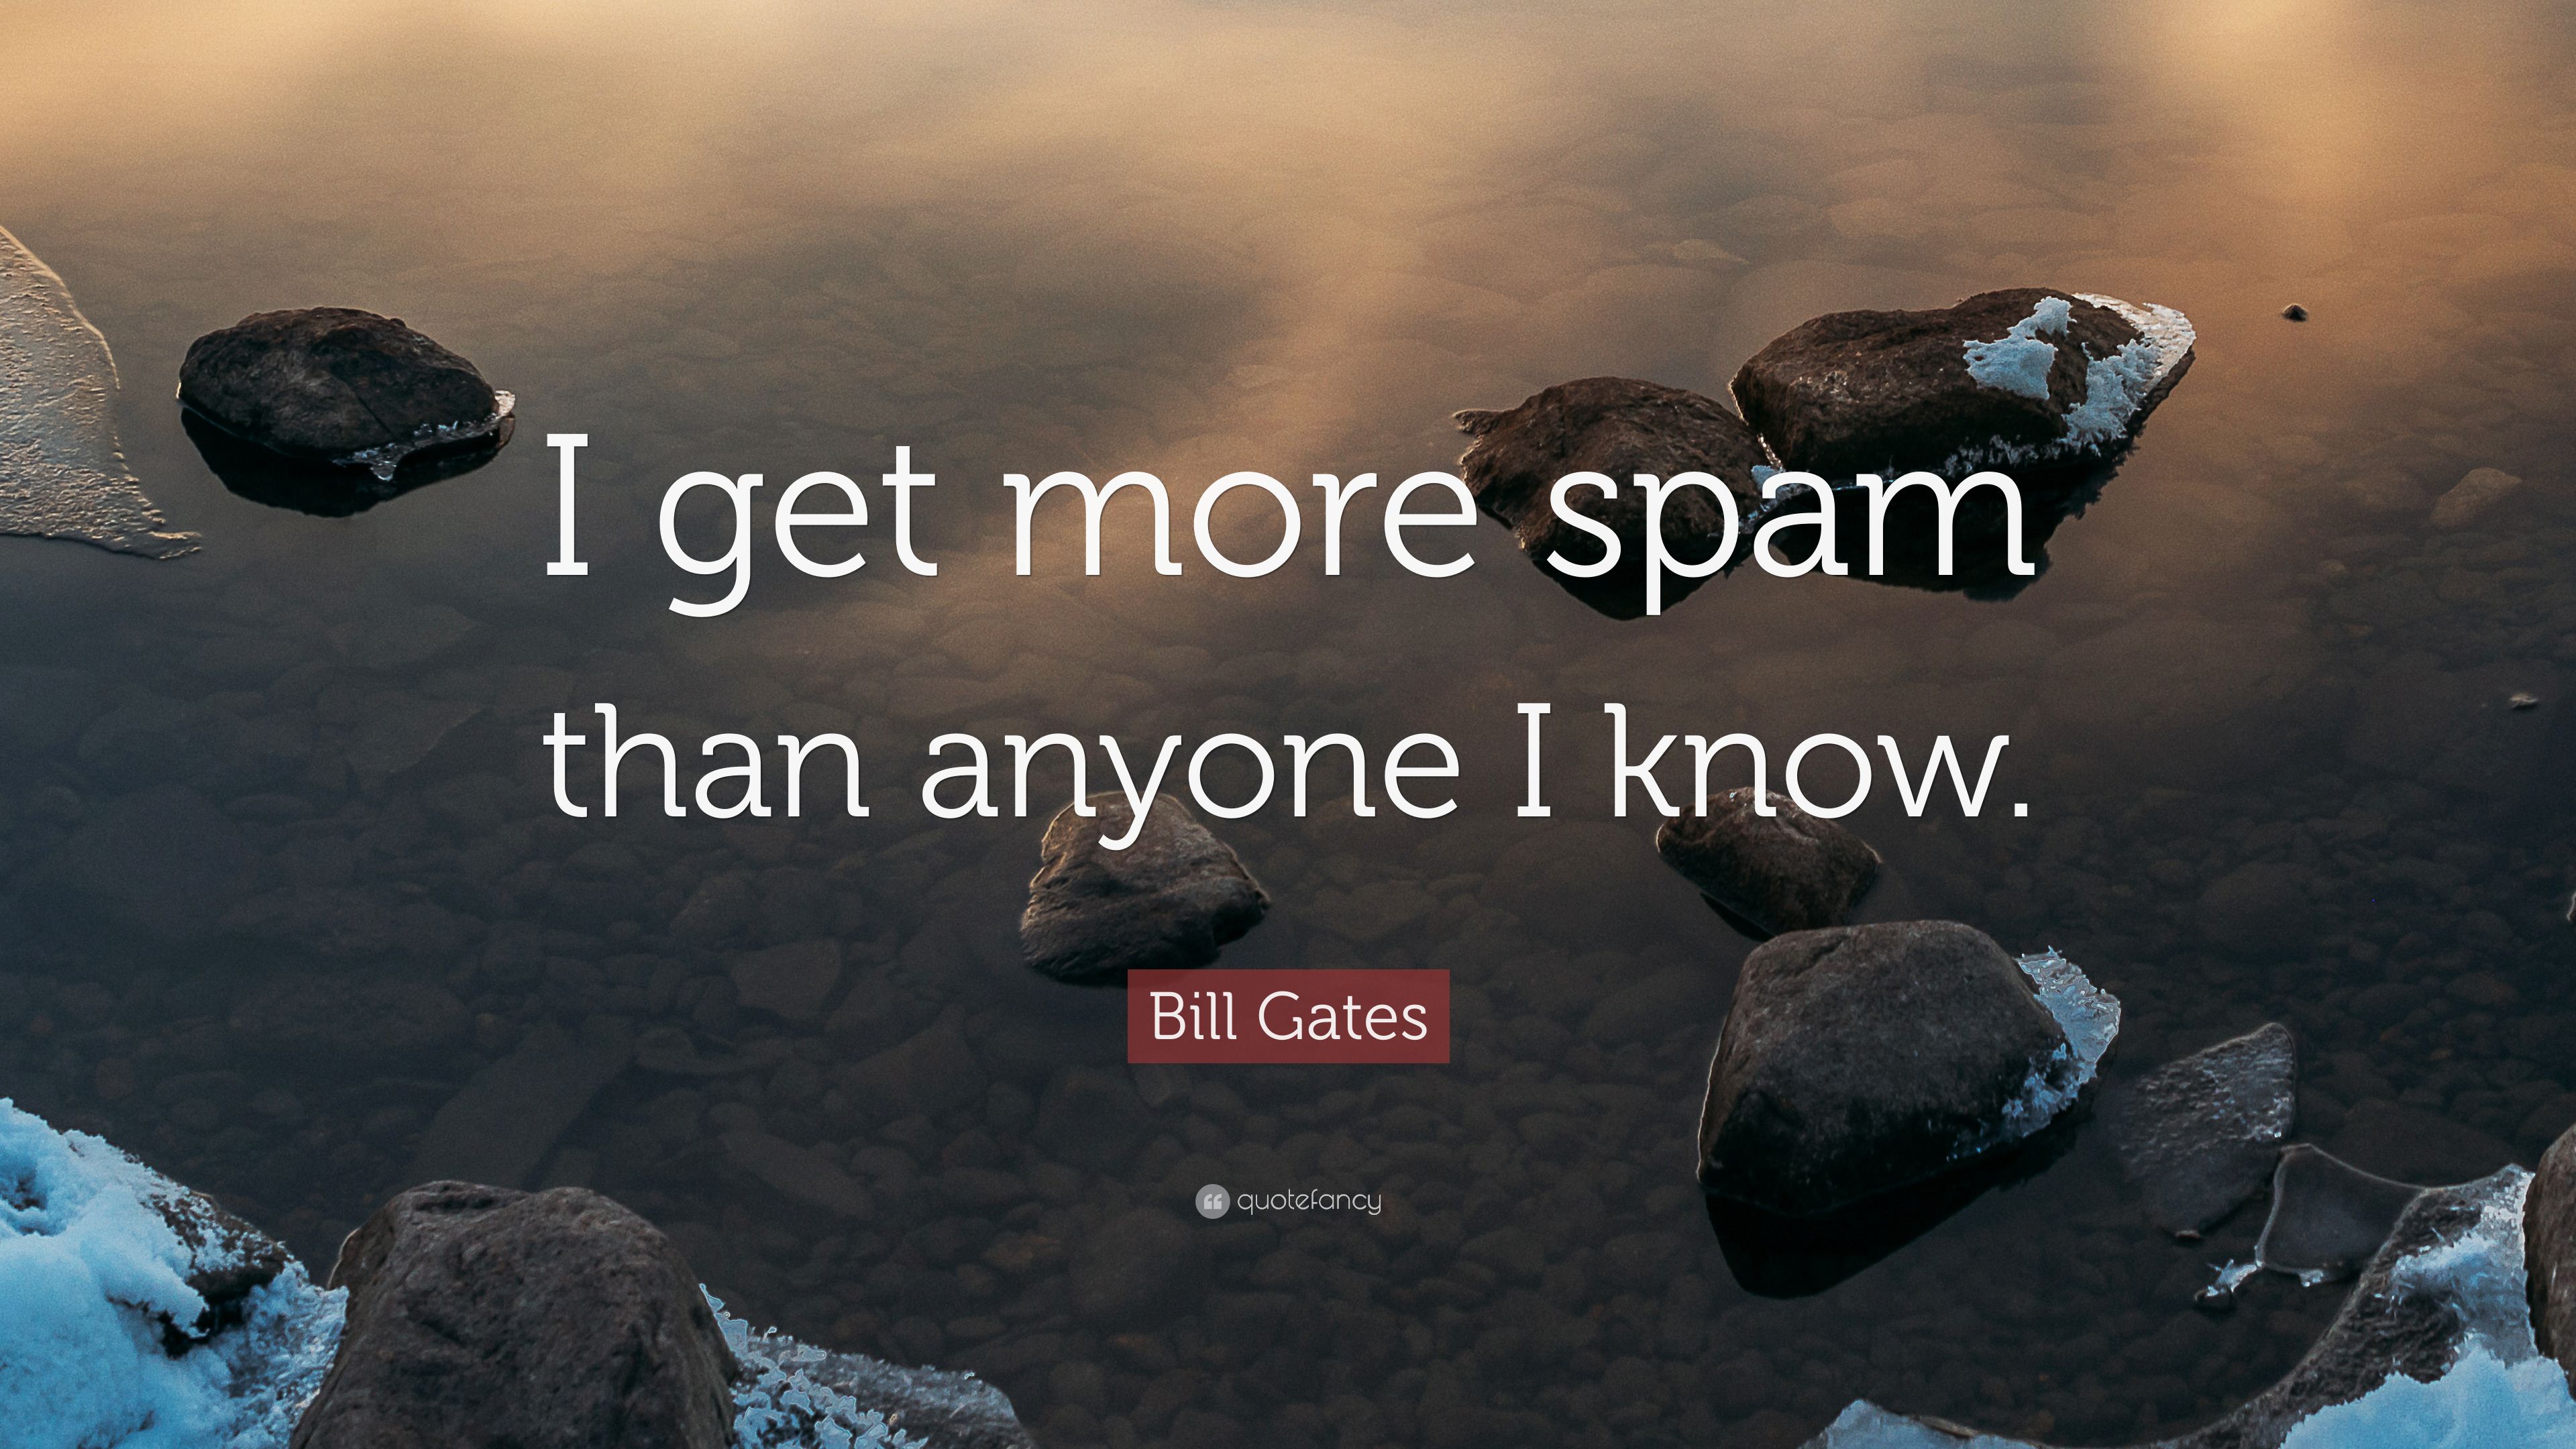 Bill Gates Quote: “I get more spam than anyone I know.” (10 wallpaper)